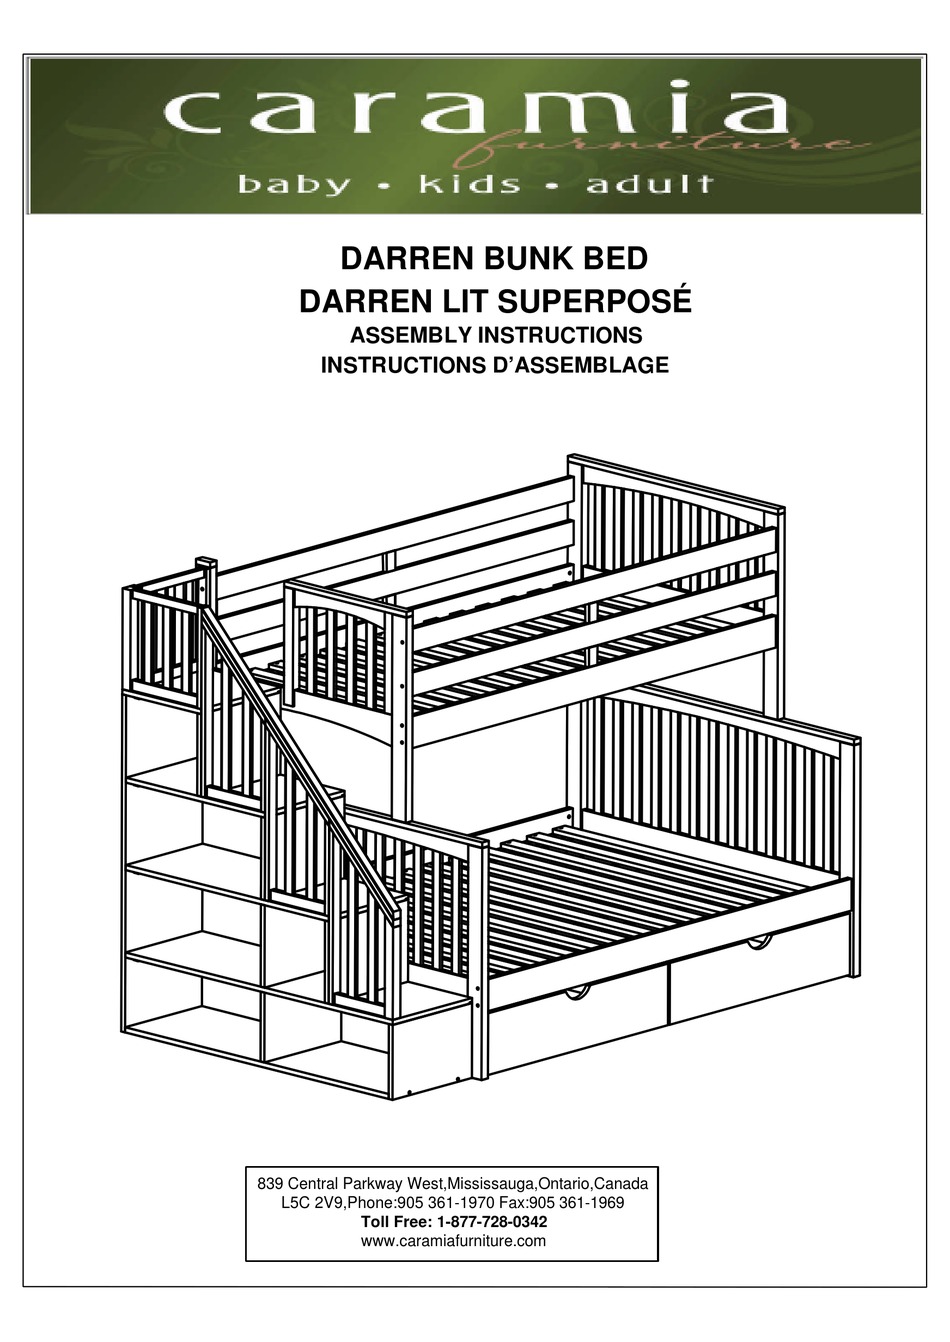 Caramia Darren Bunk Bed Assembly, Discovery Bunk Bed Instructions